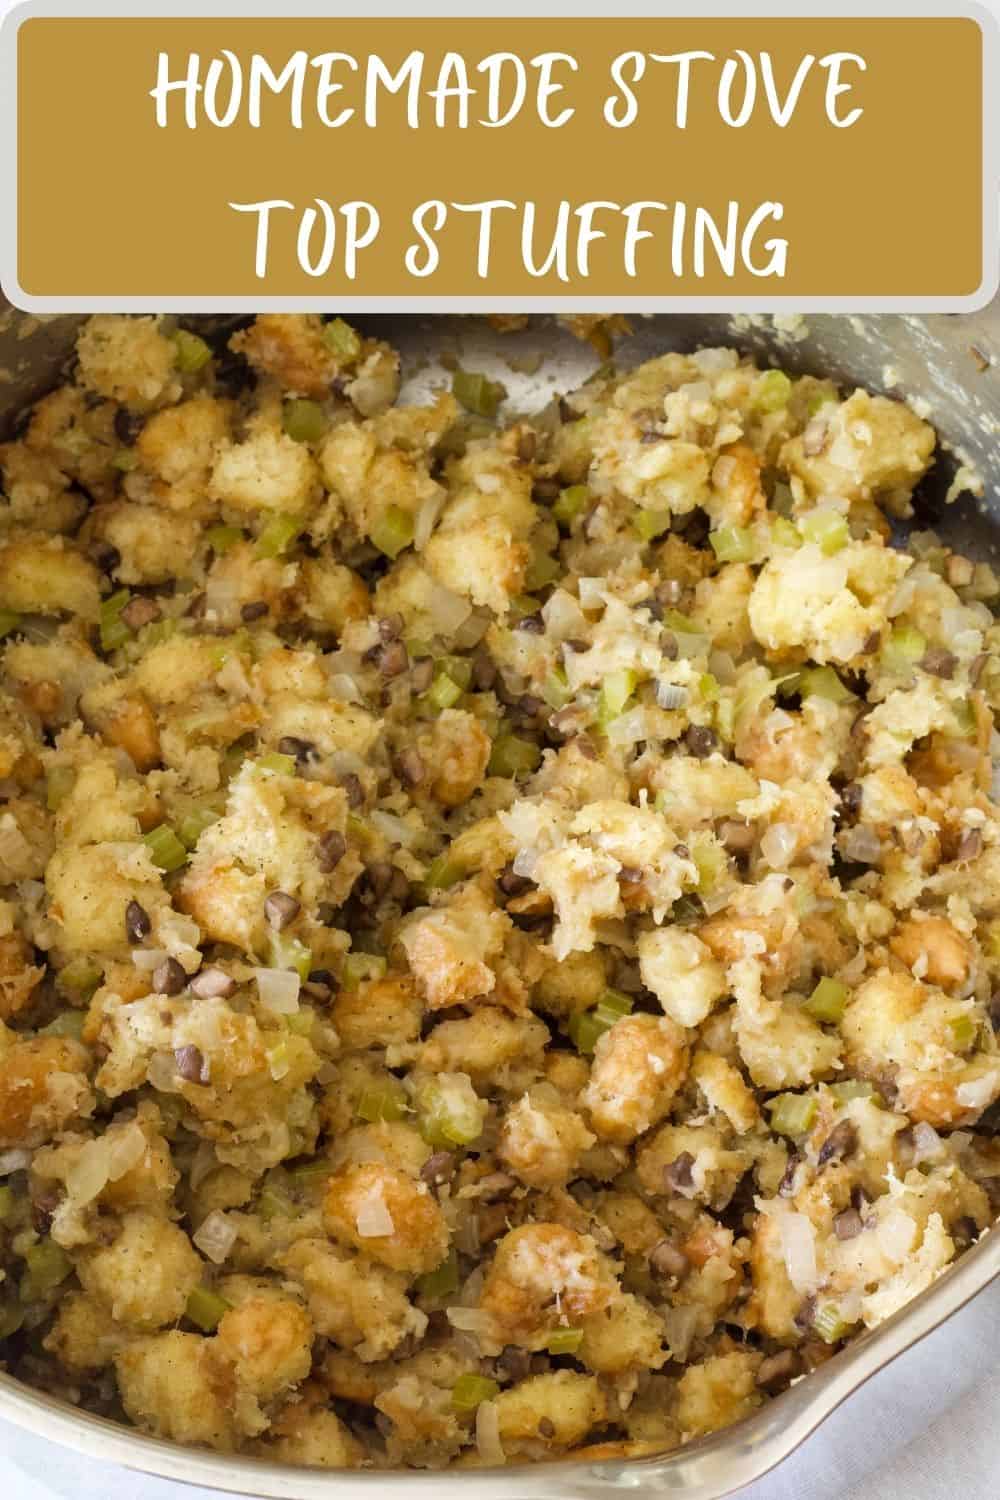 Homemade Stove Top Stuffing features dried bread, onion, celery, mushrooms, broth and seasonings. Fast, so tasty, and easier than you think! via @mindyscookingobsession